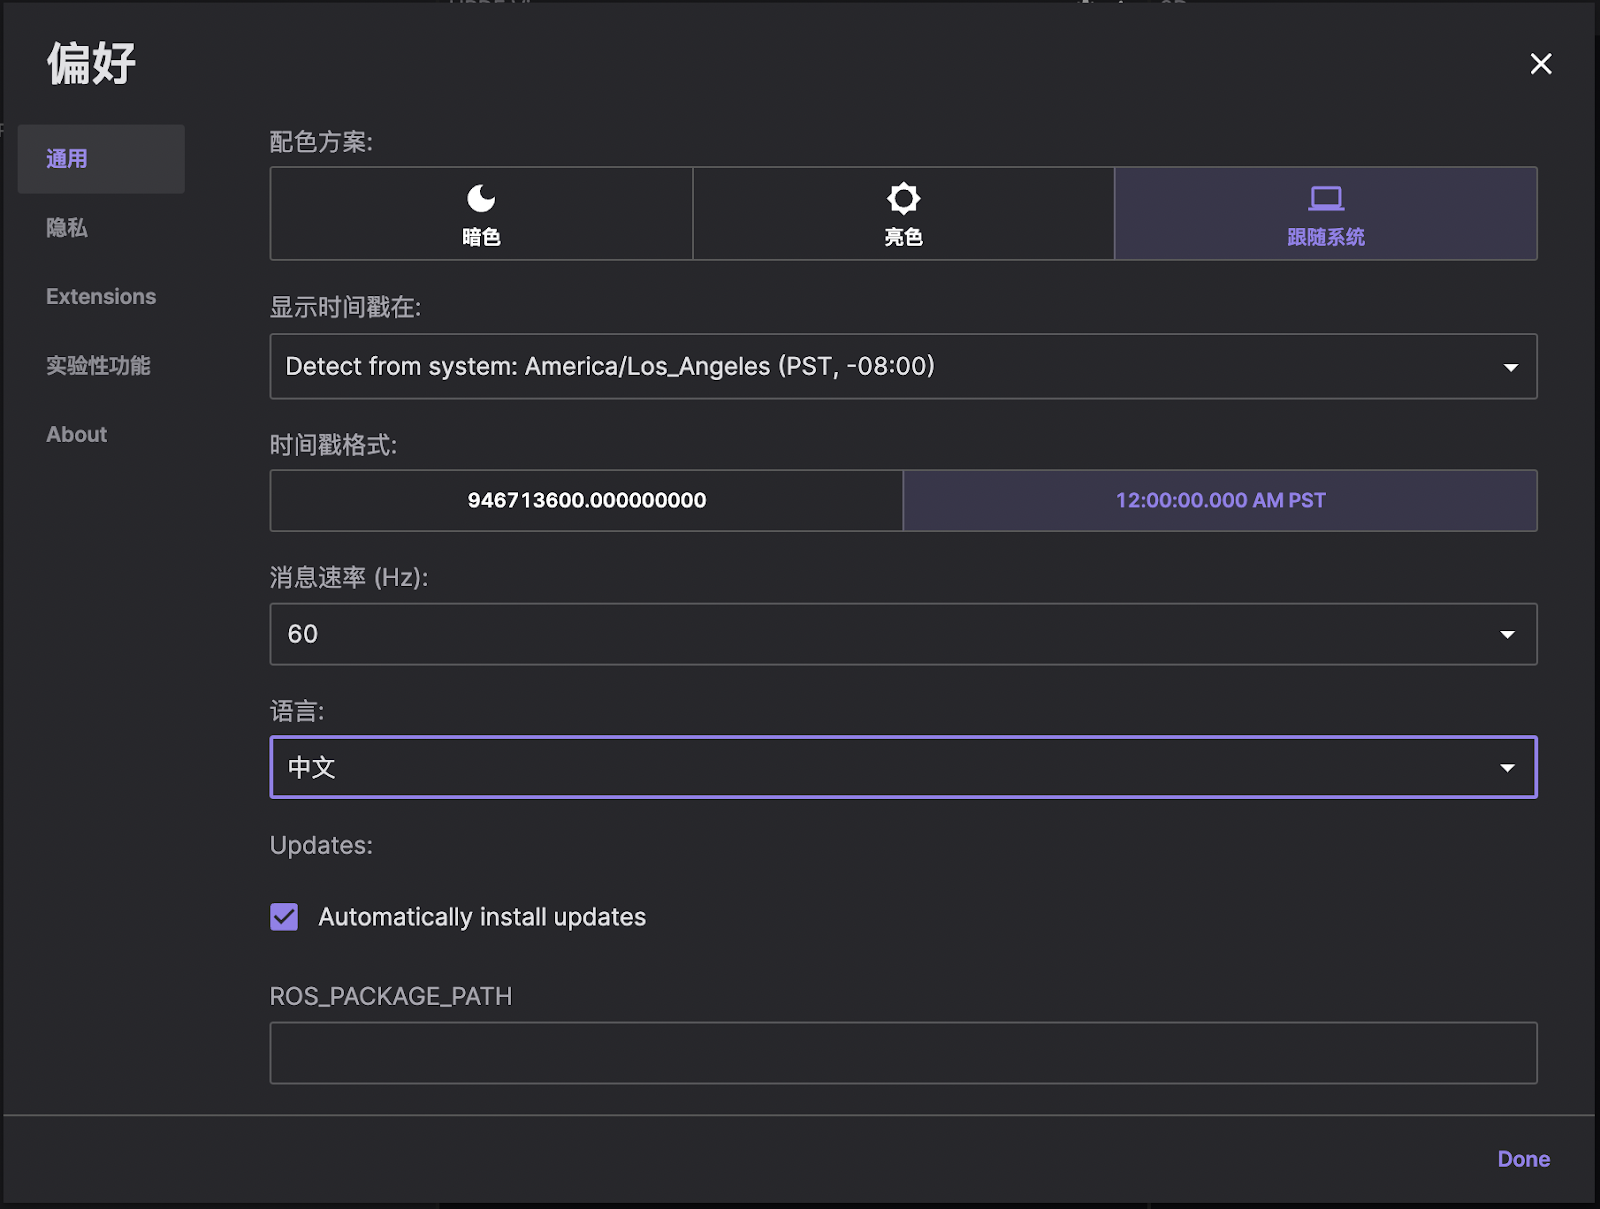 Chinese translations in
Preferences tab